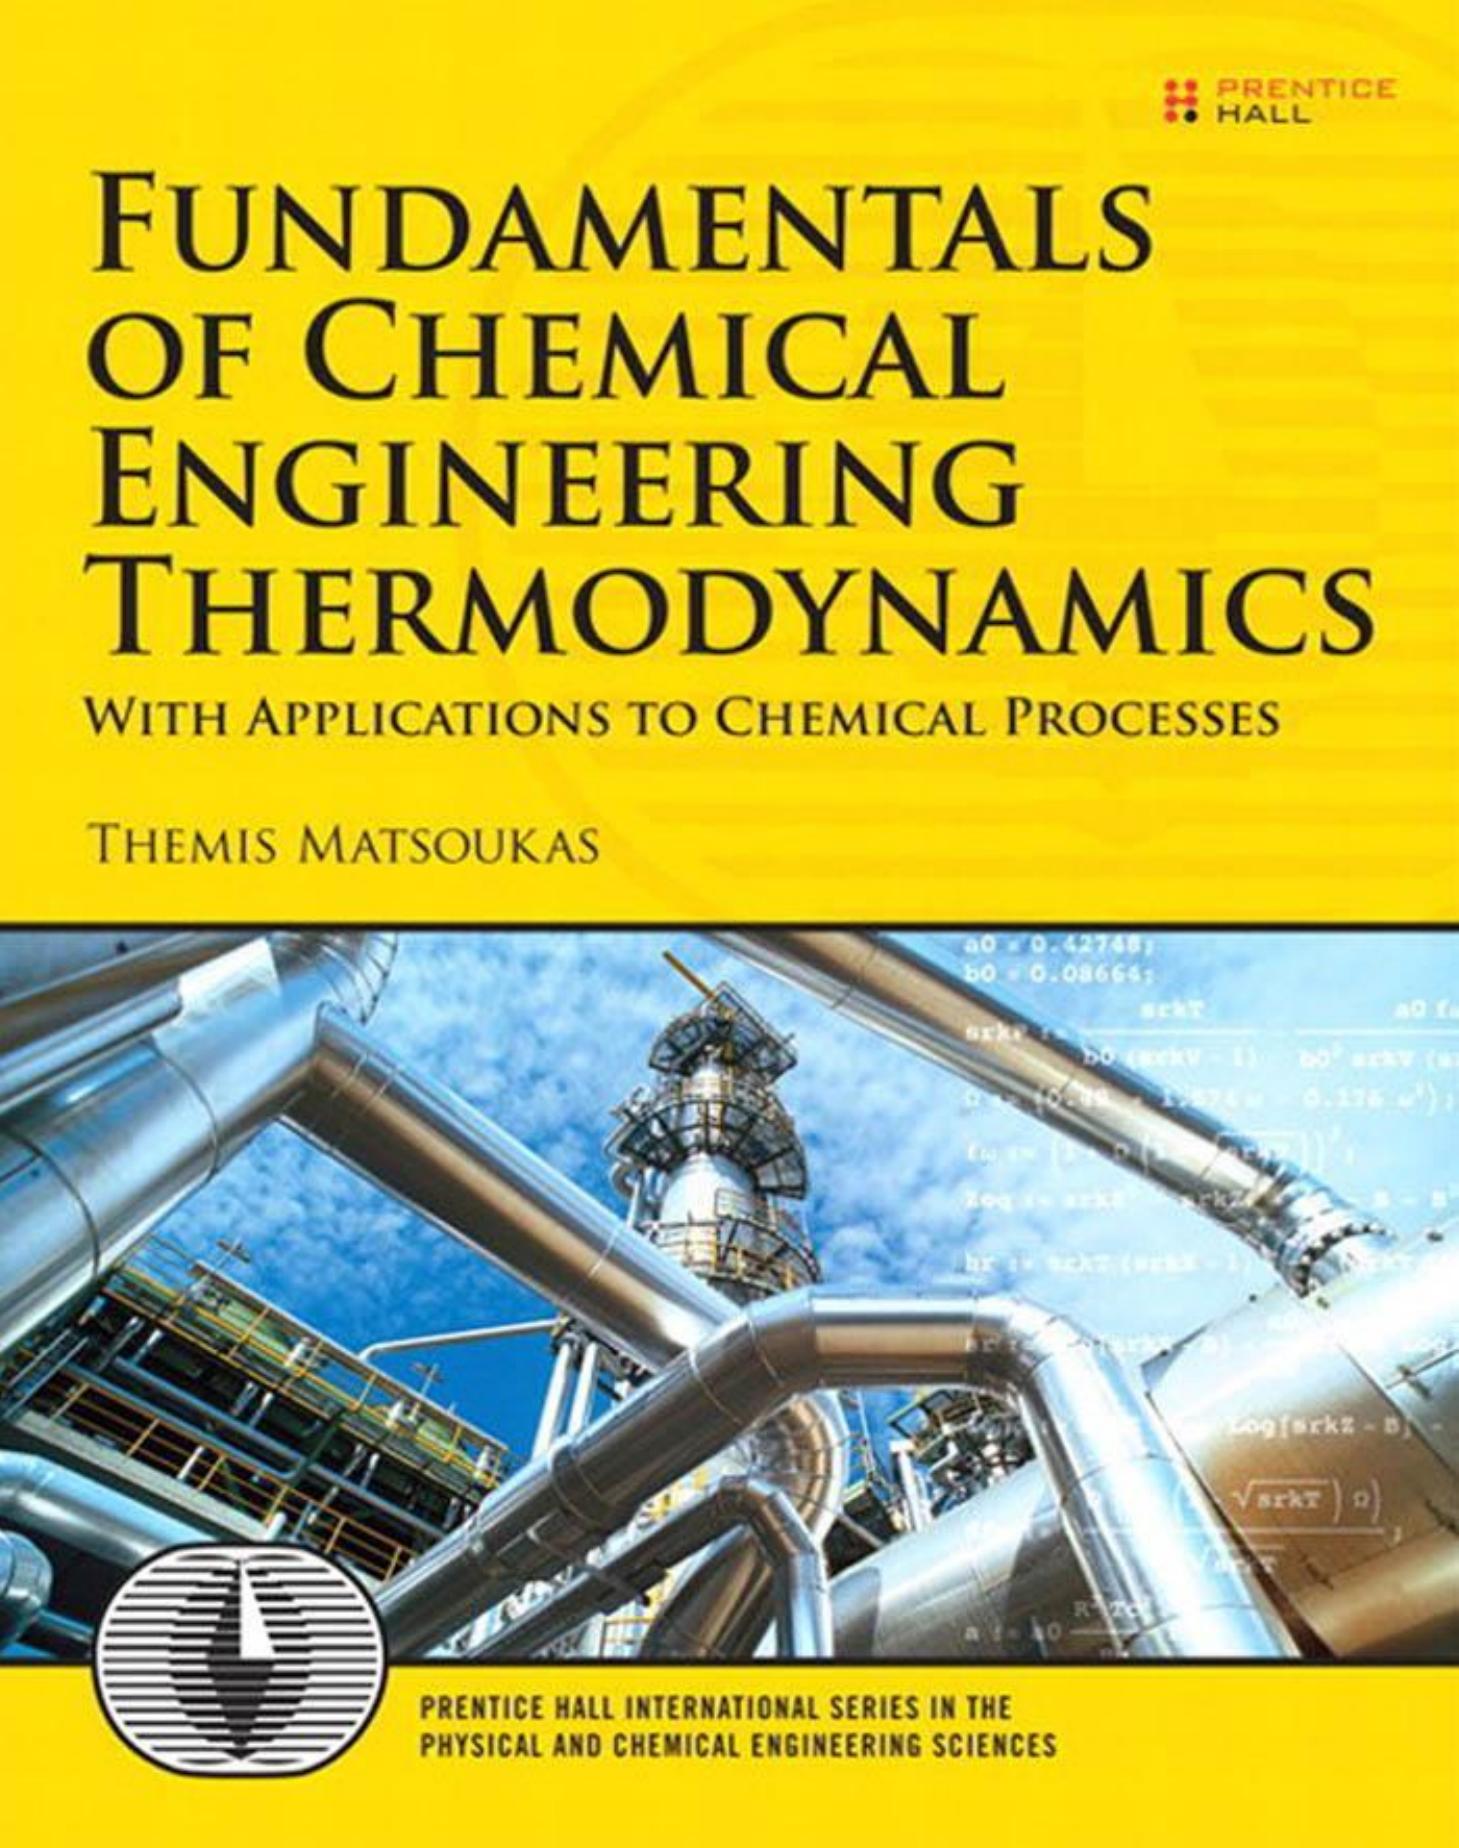 intro to chemical engineering thermodynamics pdf